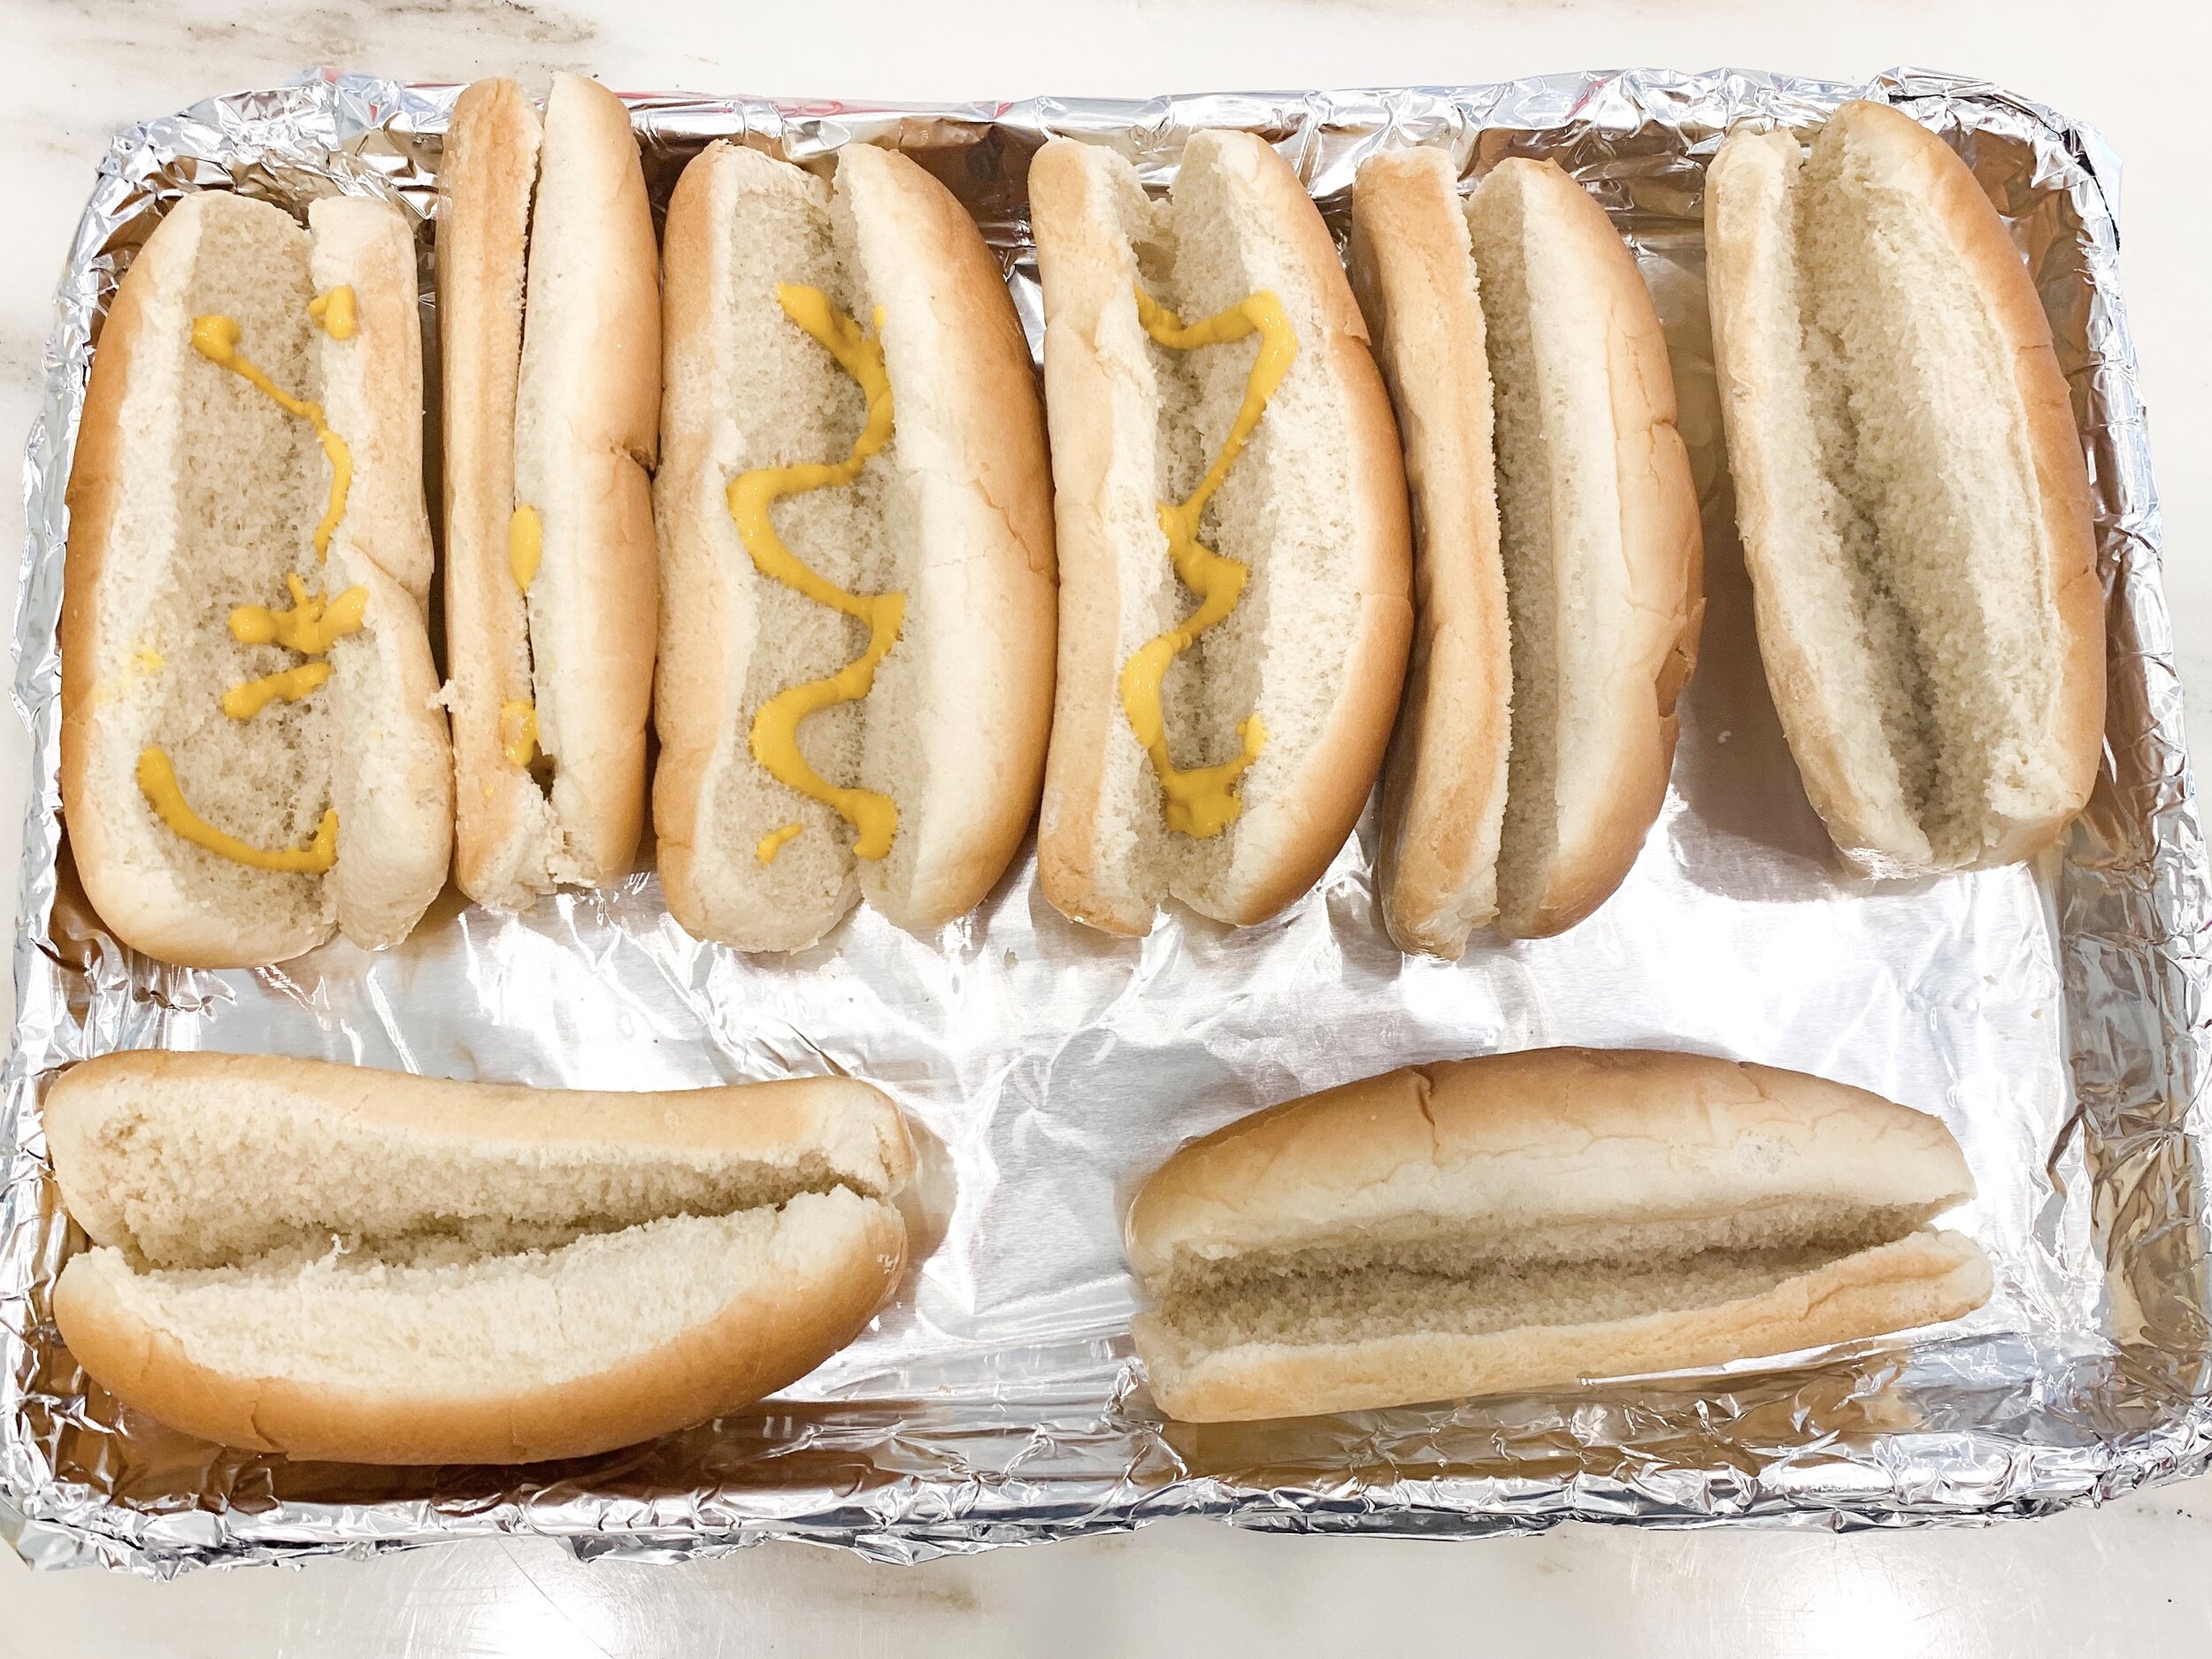 Step 1: Add mustard to the buns.